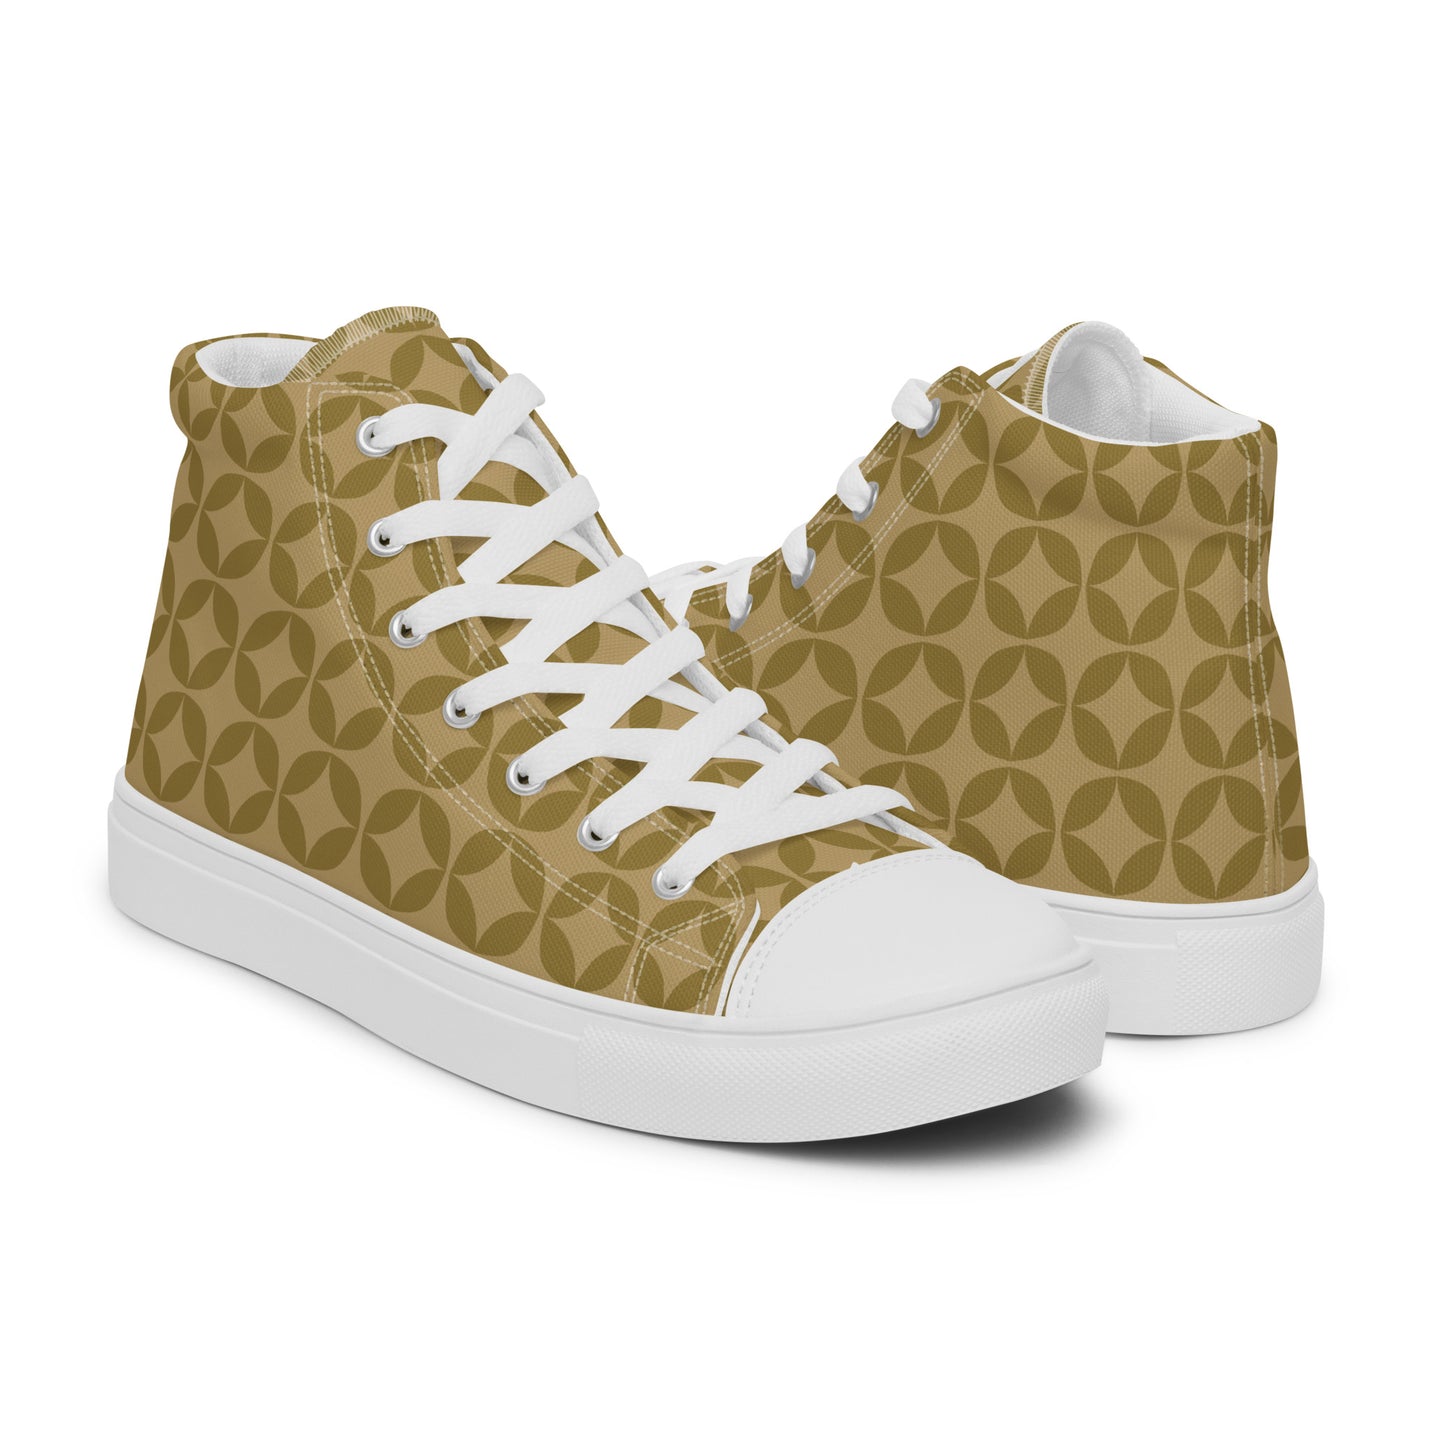 Wempy Dyocta Koto Signature Luxury - Sustainably Made Men’s high top canvas shoes